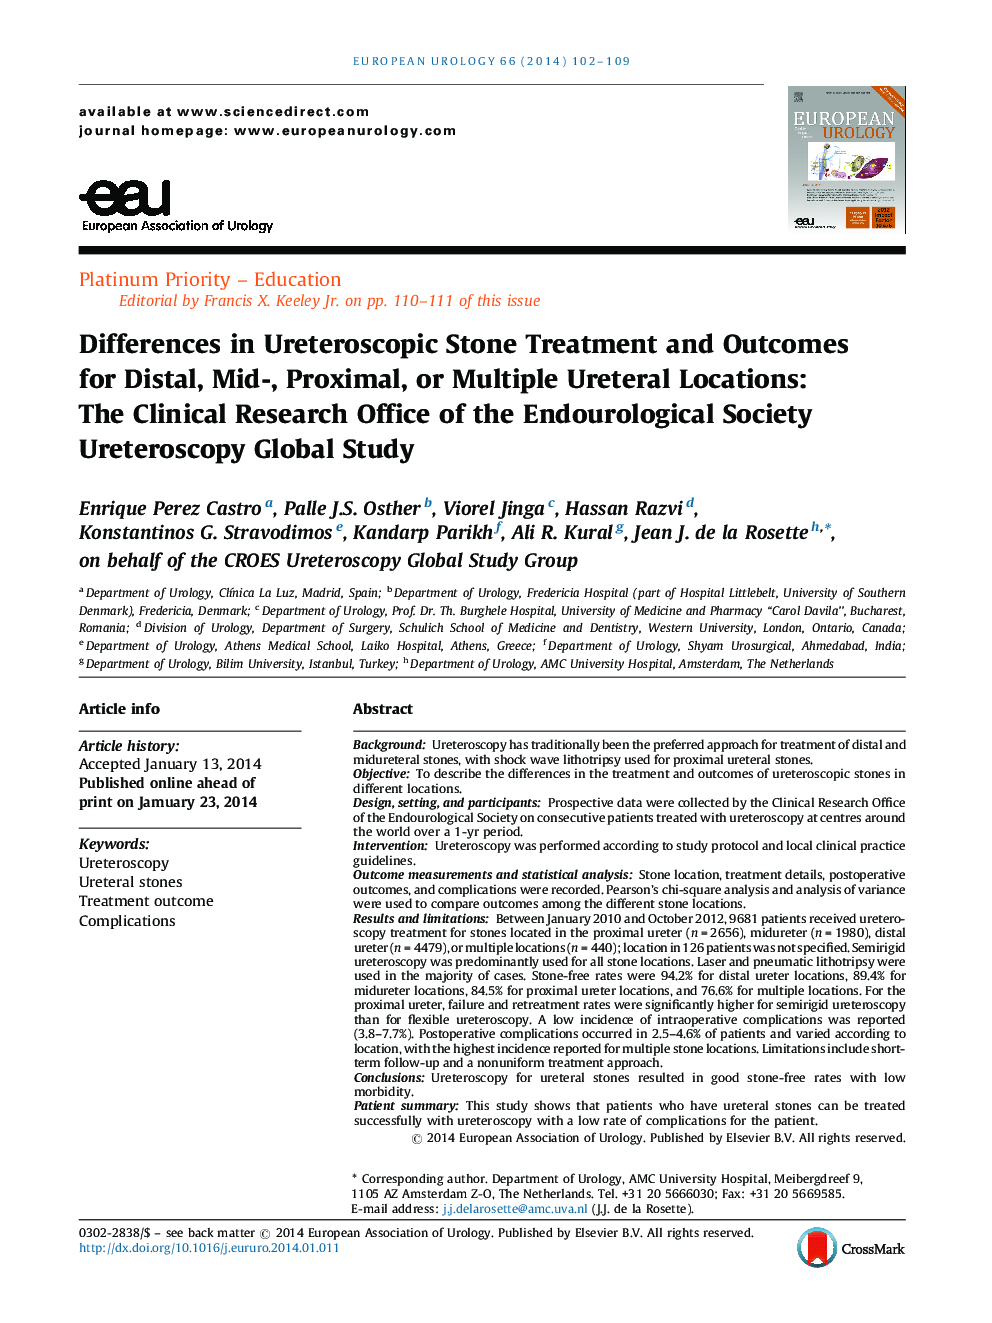 Differences in Ureteroscopic Stone Treatment and Outcomes for Distal, Mid-, Proximal, or Multiple Ureteral Locations: The Clinical Research Office of the Endourological Society Ureteroscopy Global Study